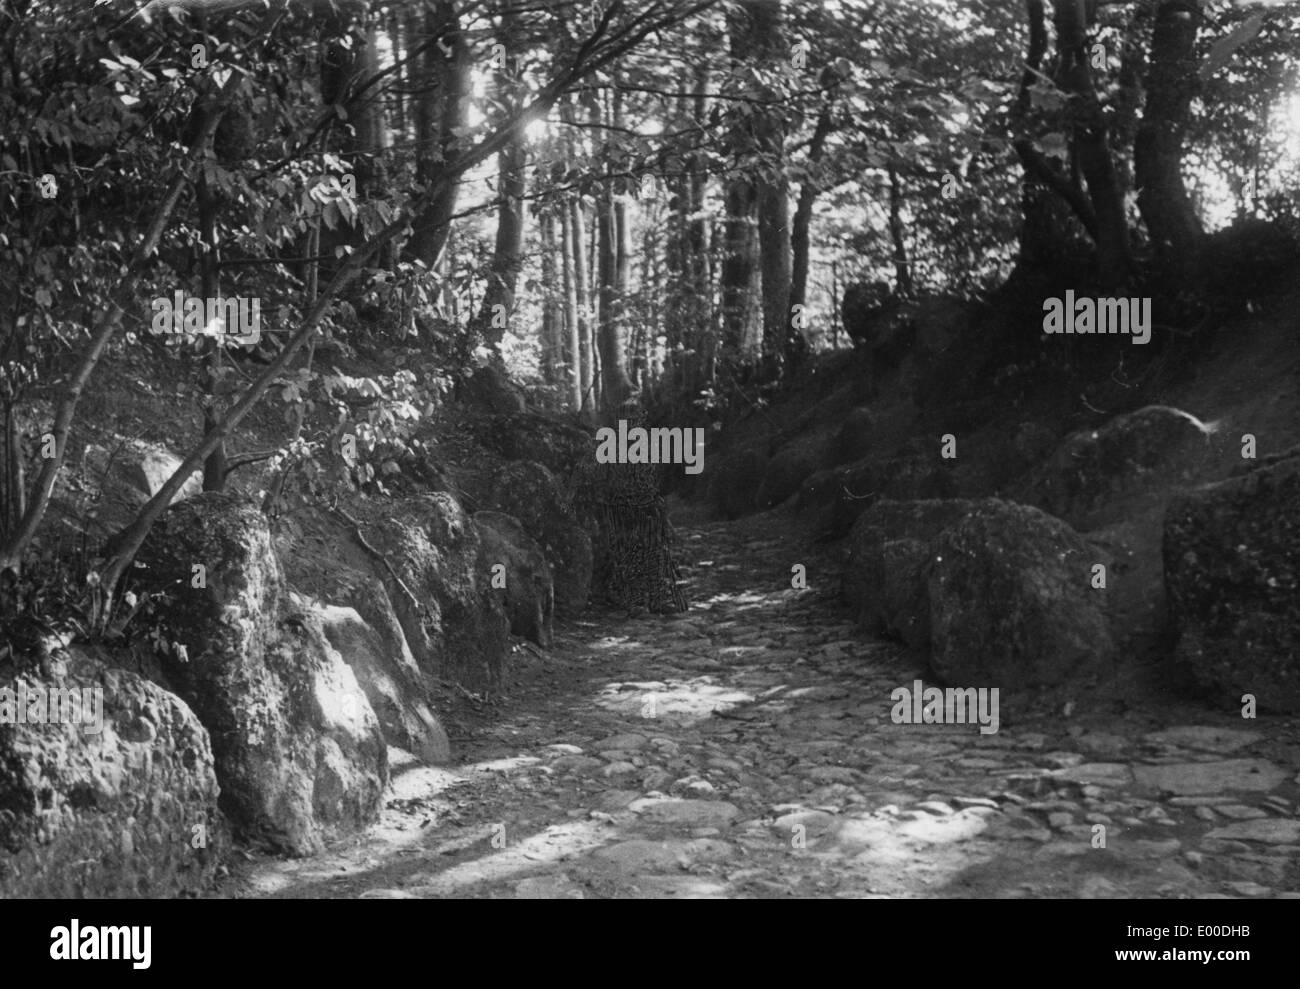 Gasse Black and White Stock Photos & Images - Alamy